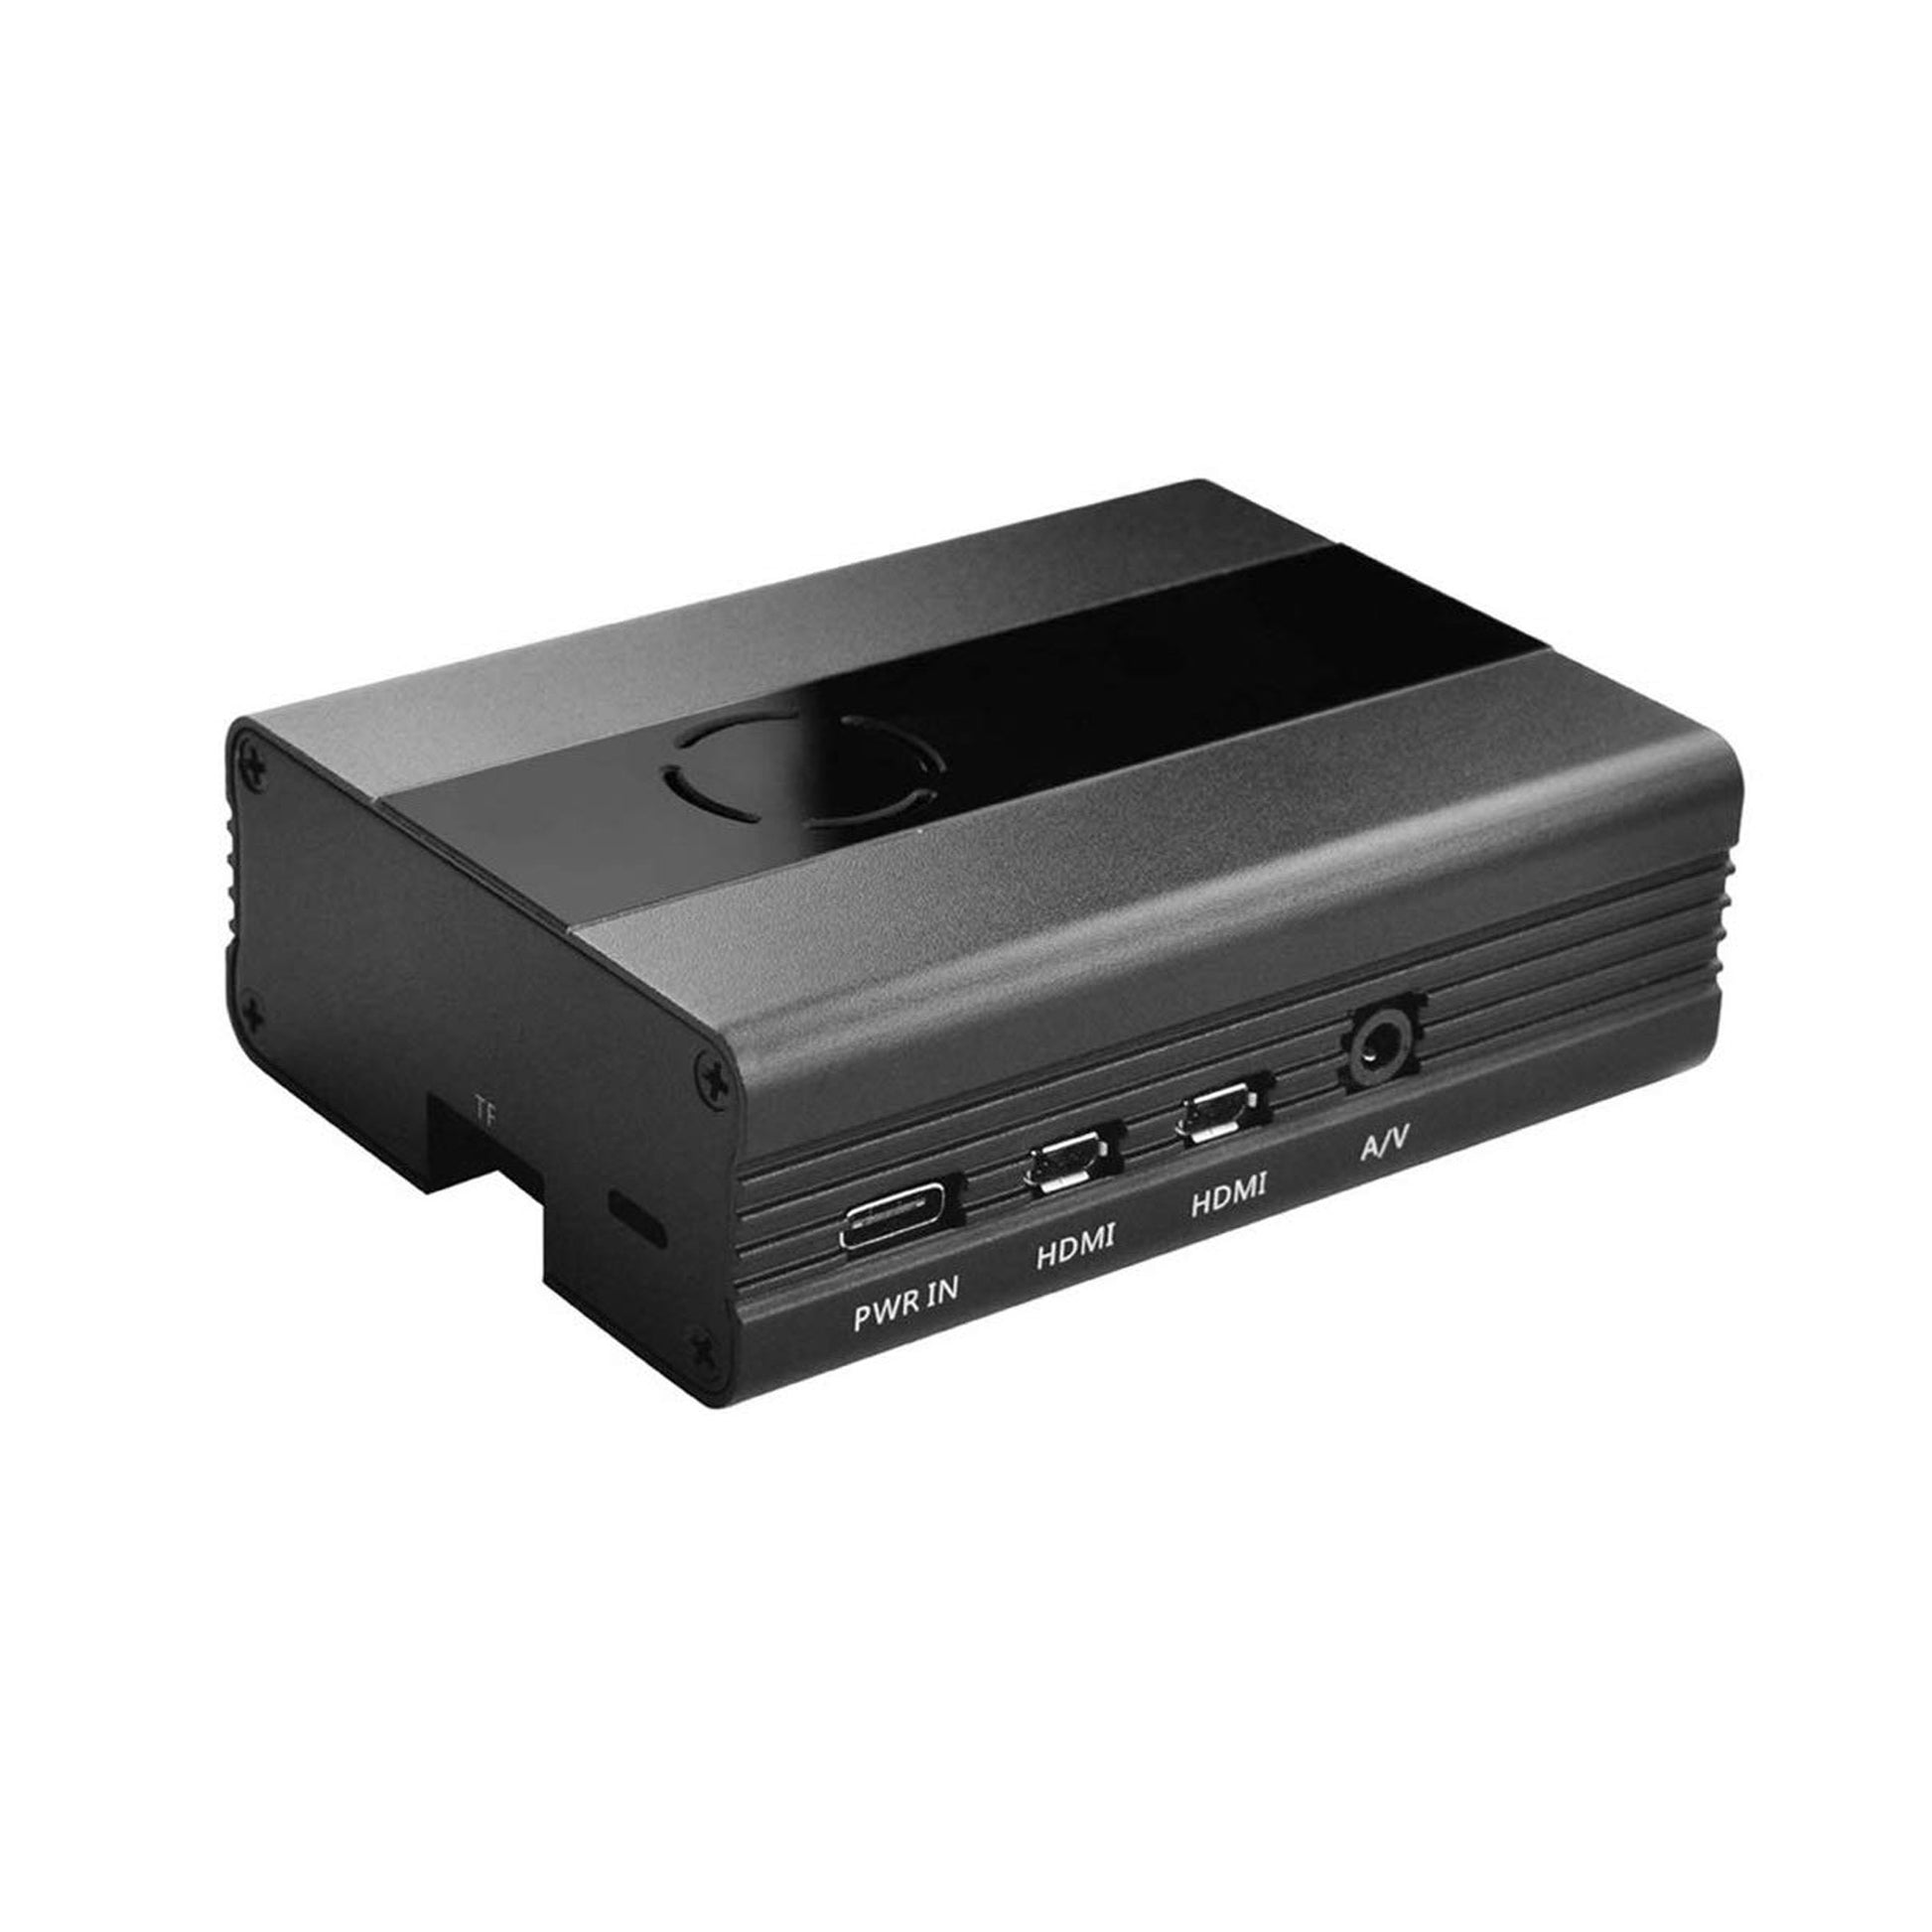 Raspberry Pi 4 Metal Case, Raspberry Pi 4 Model B Aluminum Alloy Case with Cooling Fan - Black - RS2641 - REES52